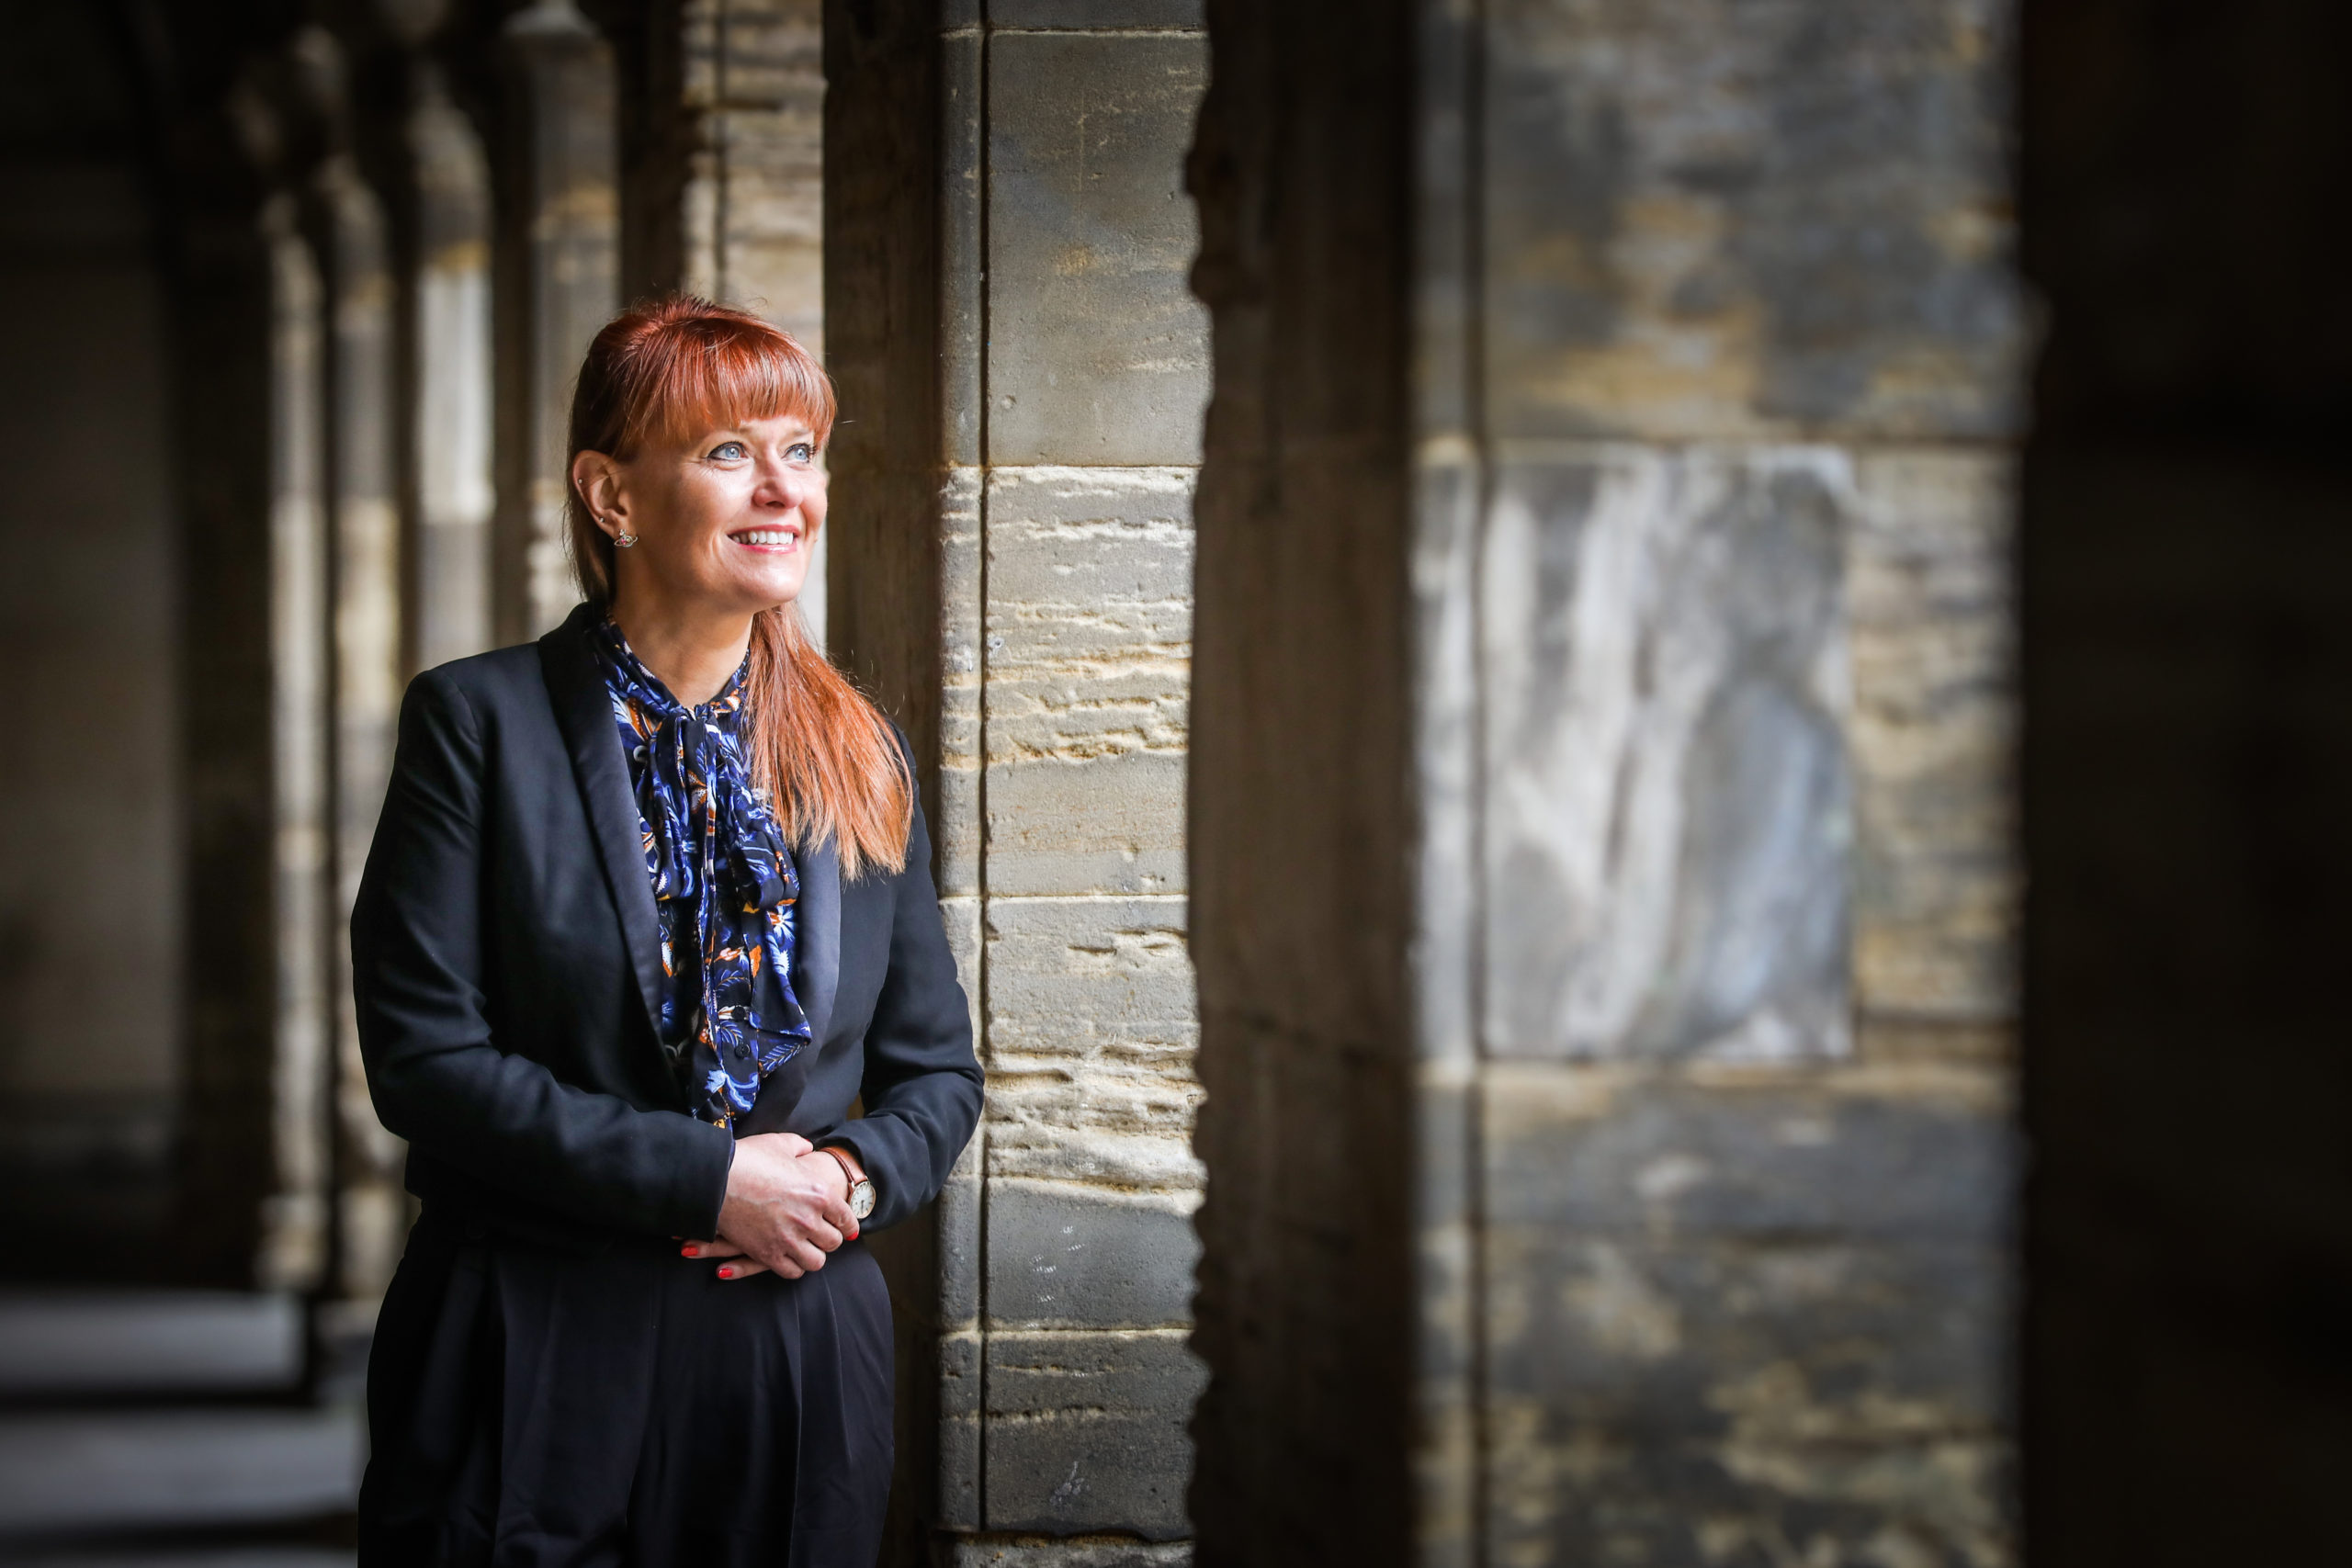 New rector Avril McNeill will lead Madras College from the historic to the modern as it moves from its campus at South Street.